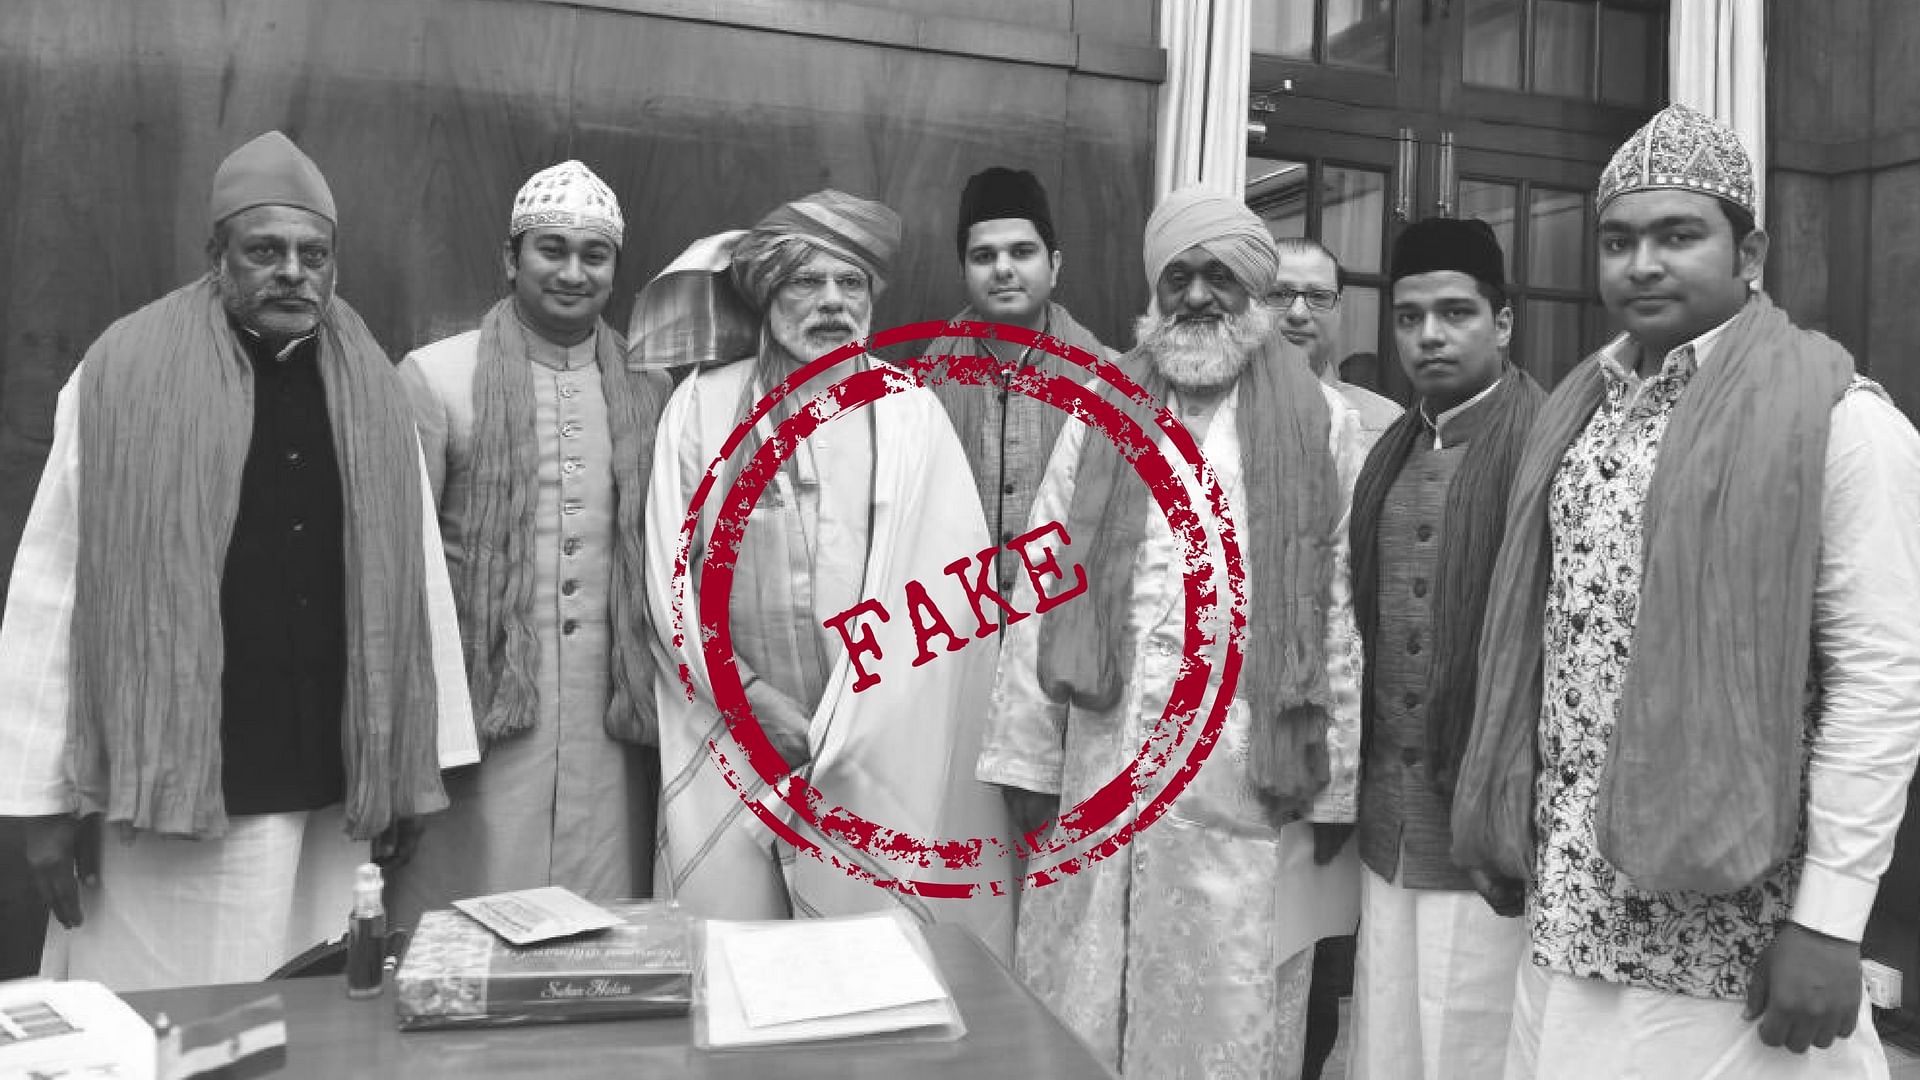 A photo of PM Modi from the Ajmer Sharif Dargah is being given a nefarious spin linking it to the upcoming election in Gujarat.